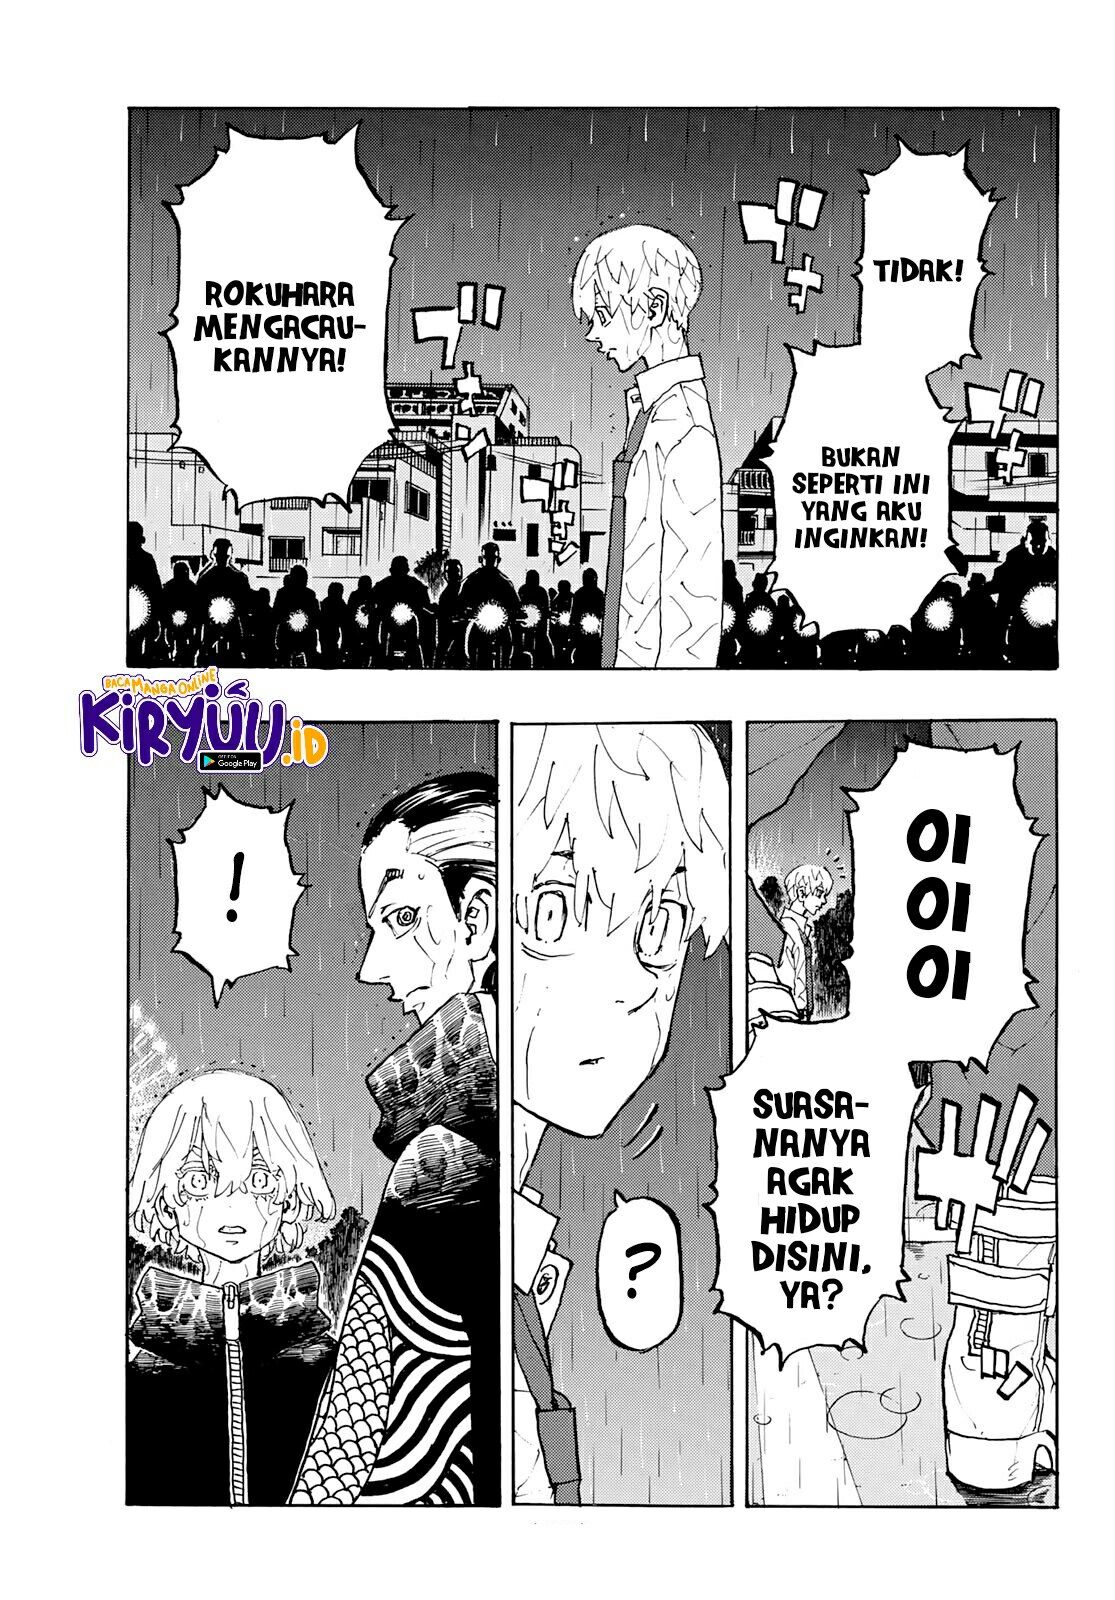 Indonesia tokyo bahasa chapter revengers 224 Chapter 224: